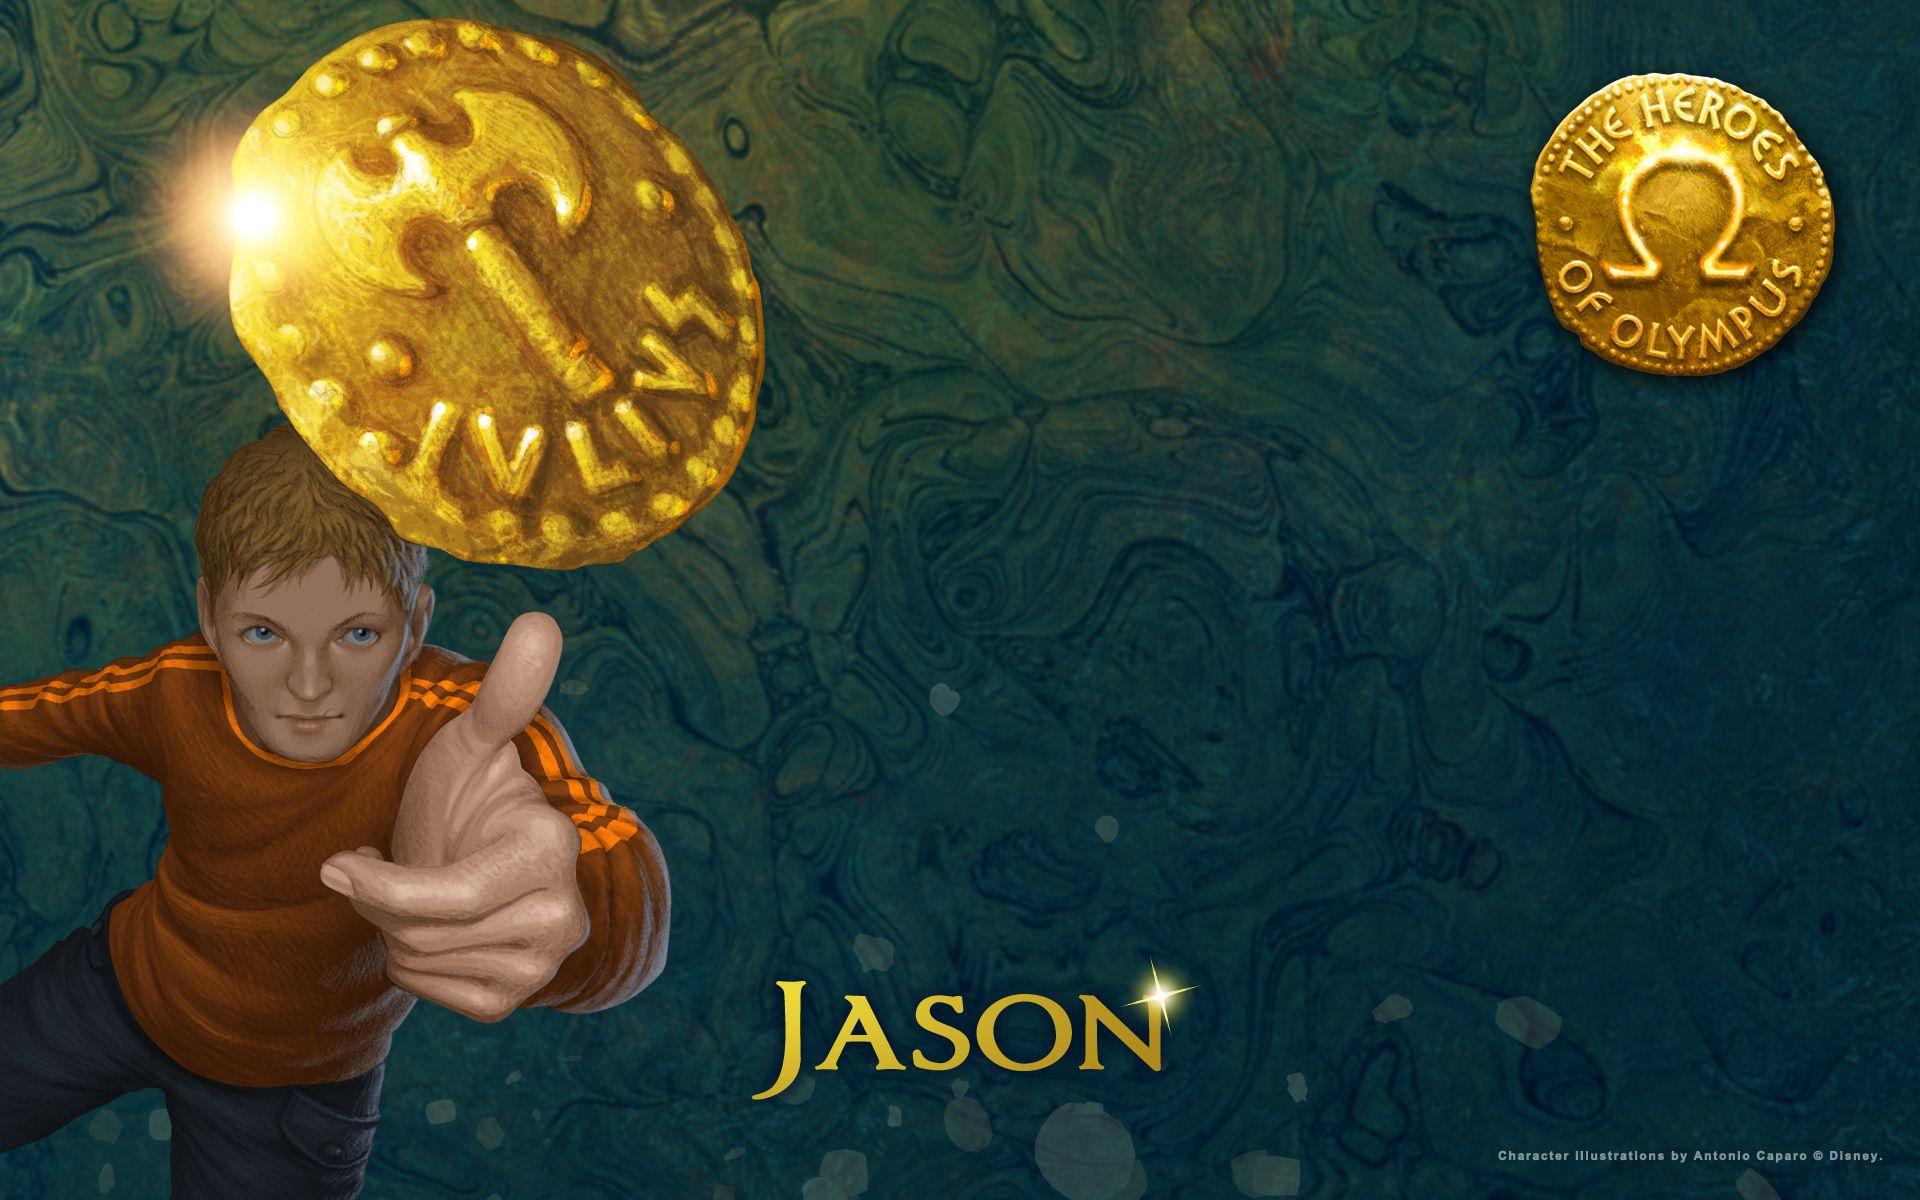 Jason and the Heroes of Olympus wallpaper and image